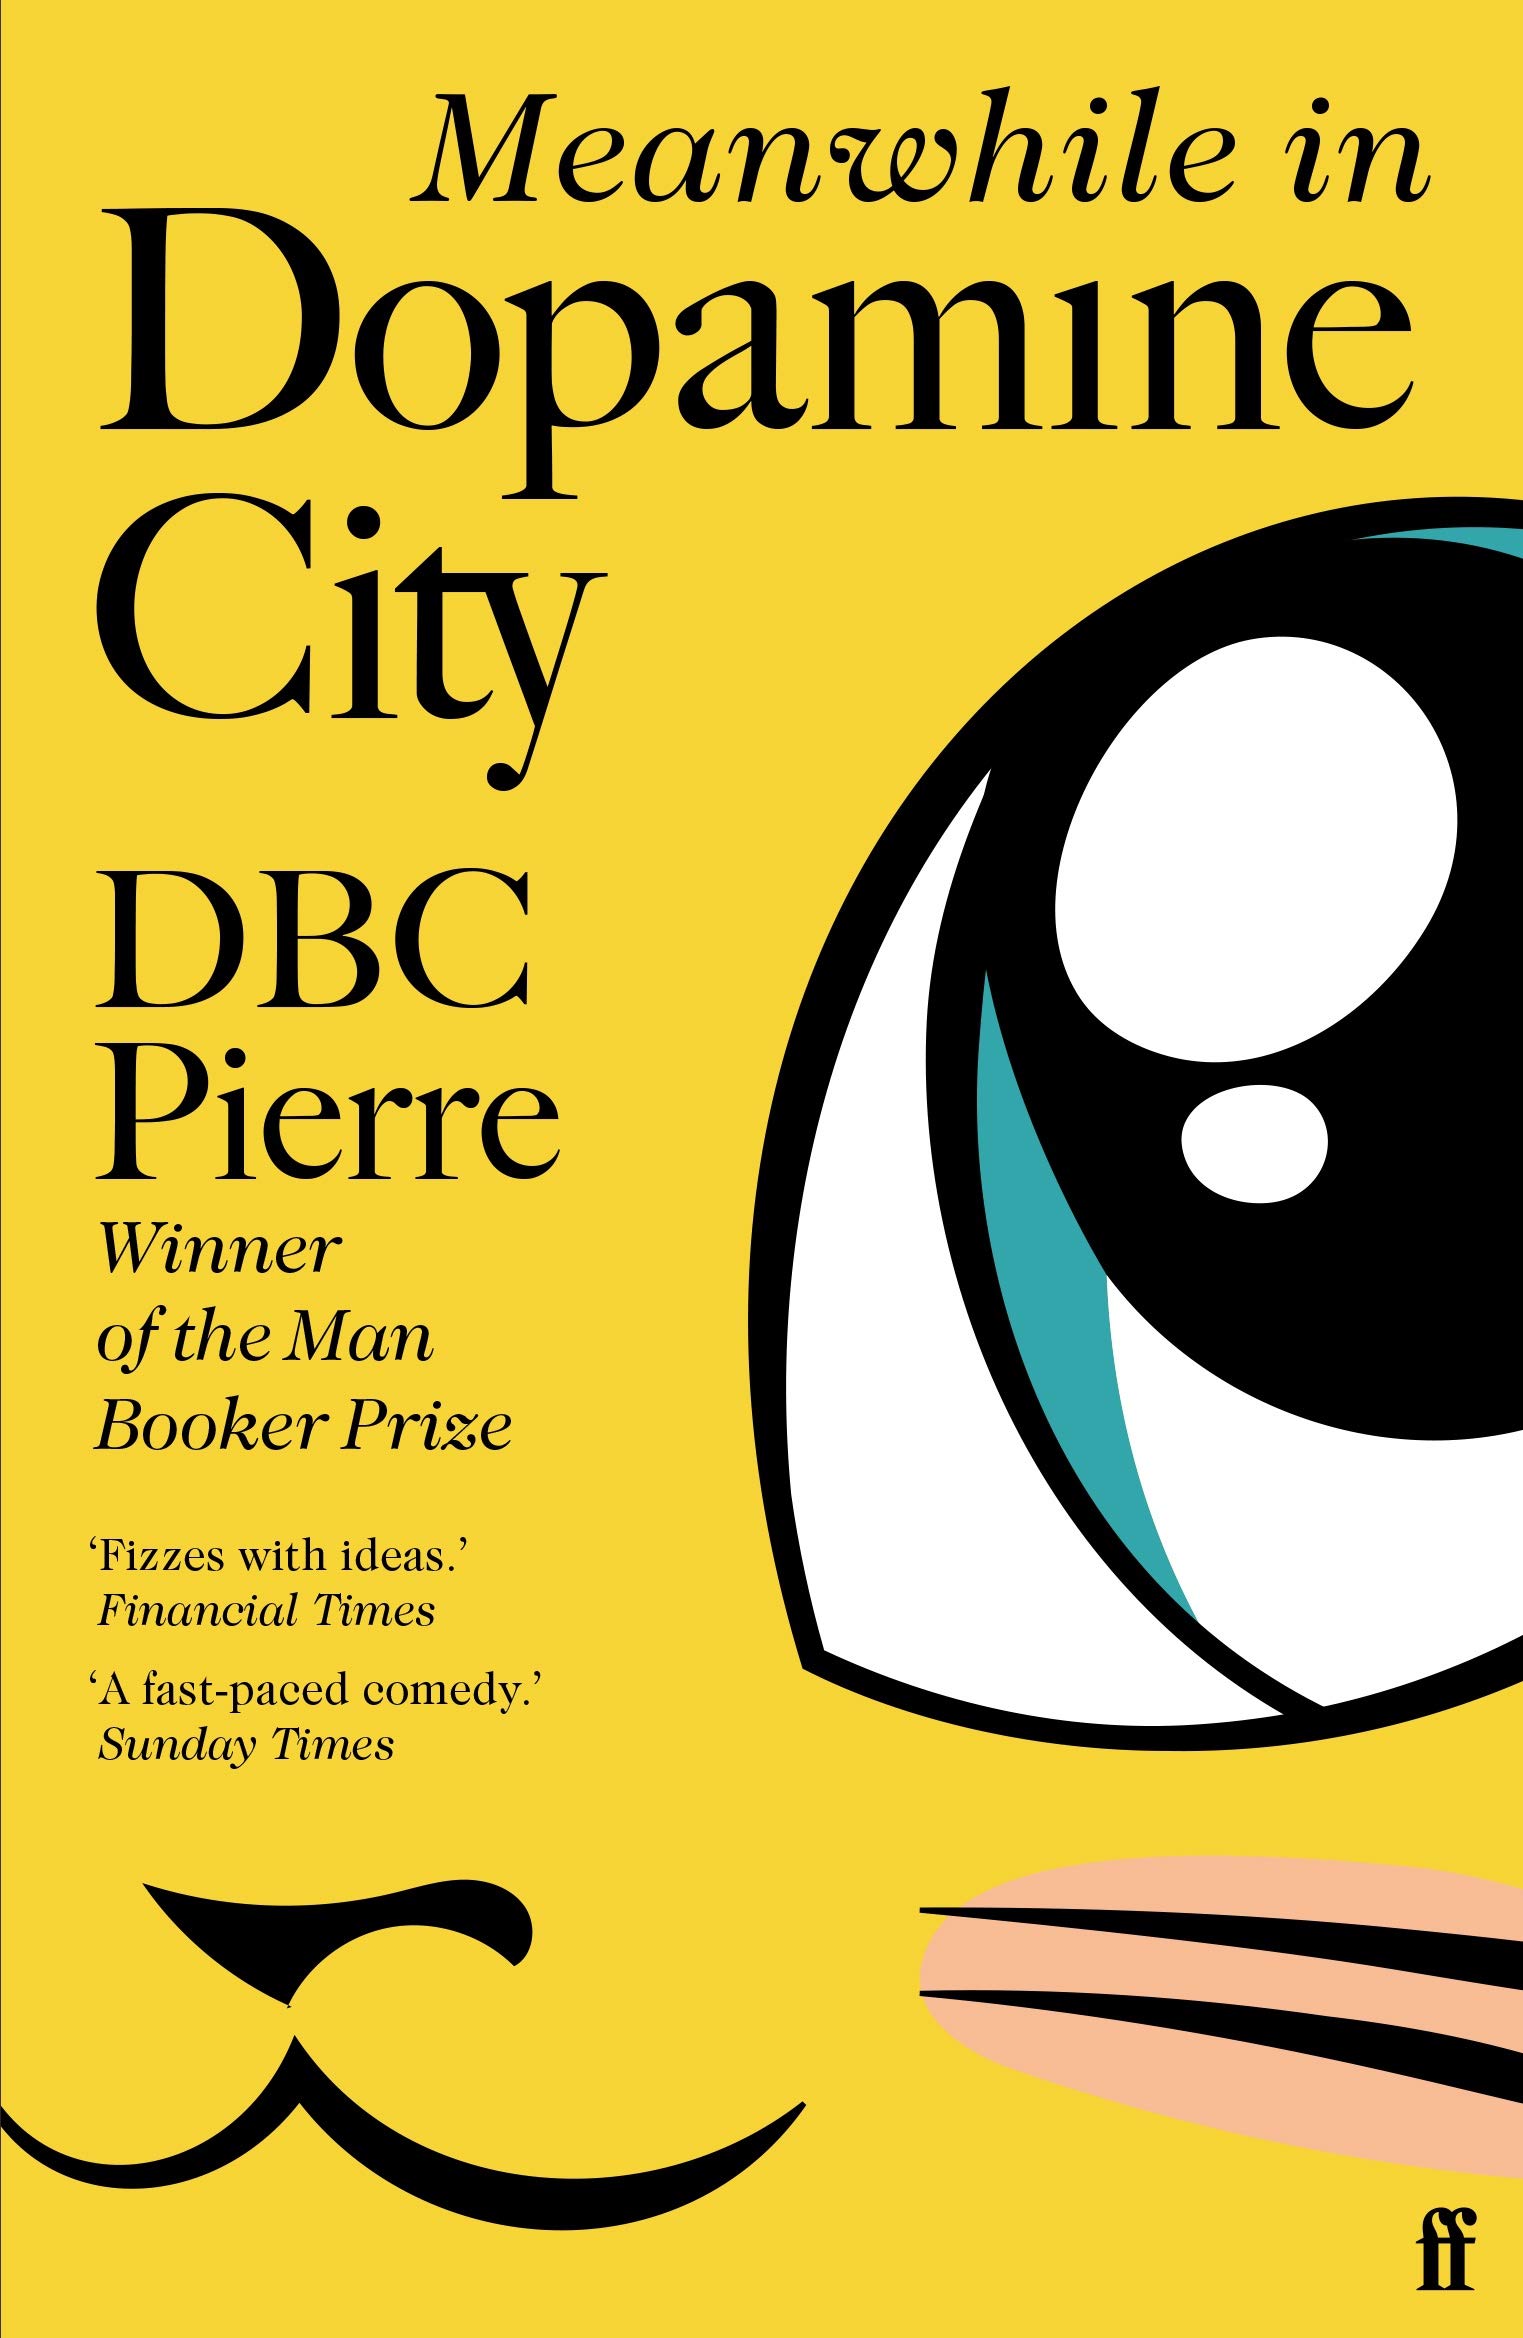 Meanwhile in Dopamine City | DBC Pierre